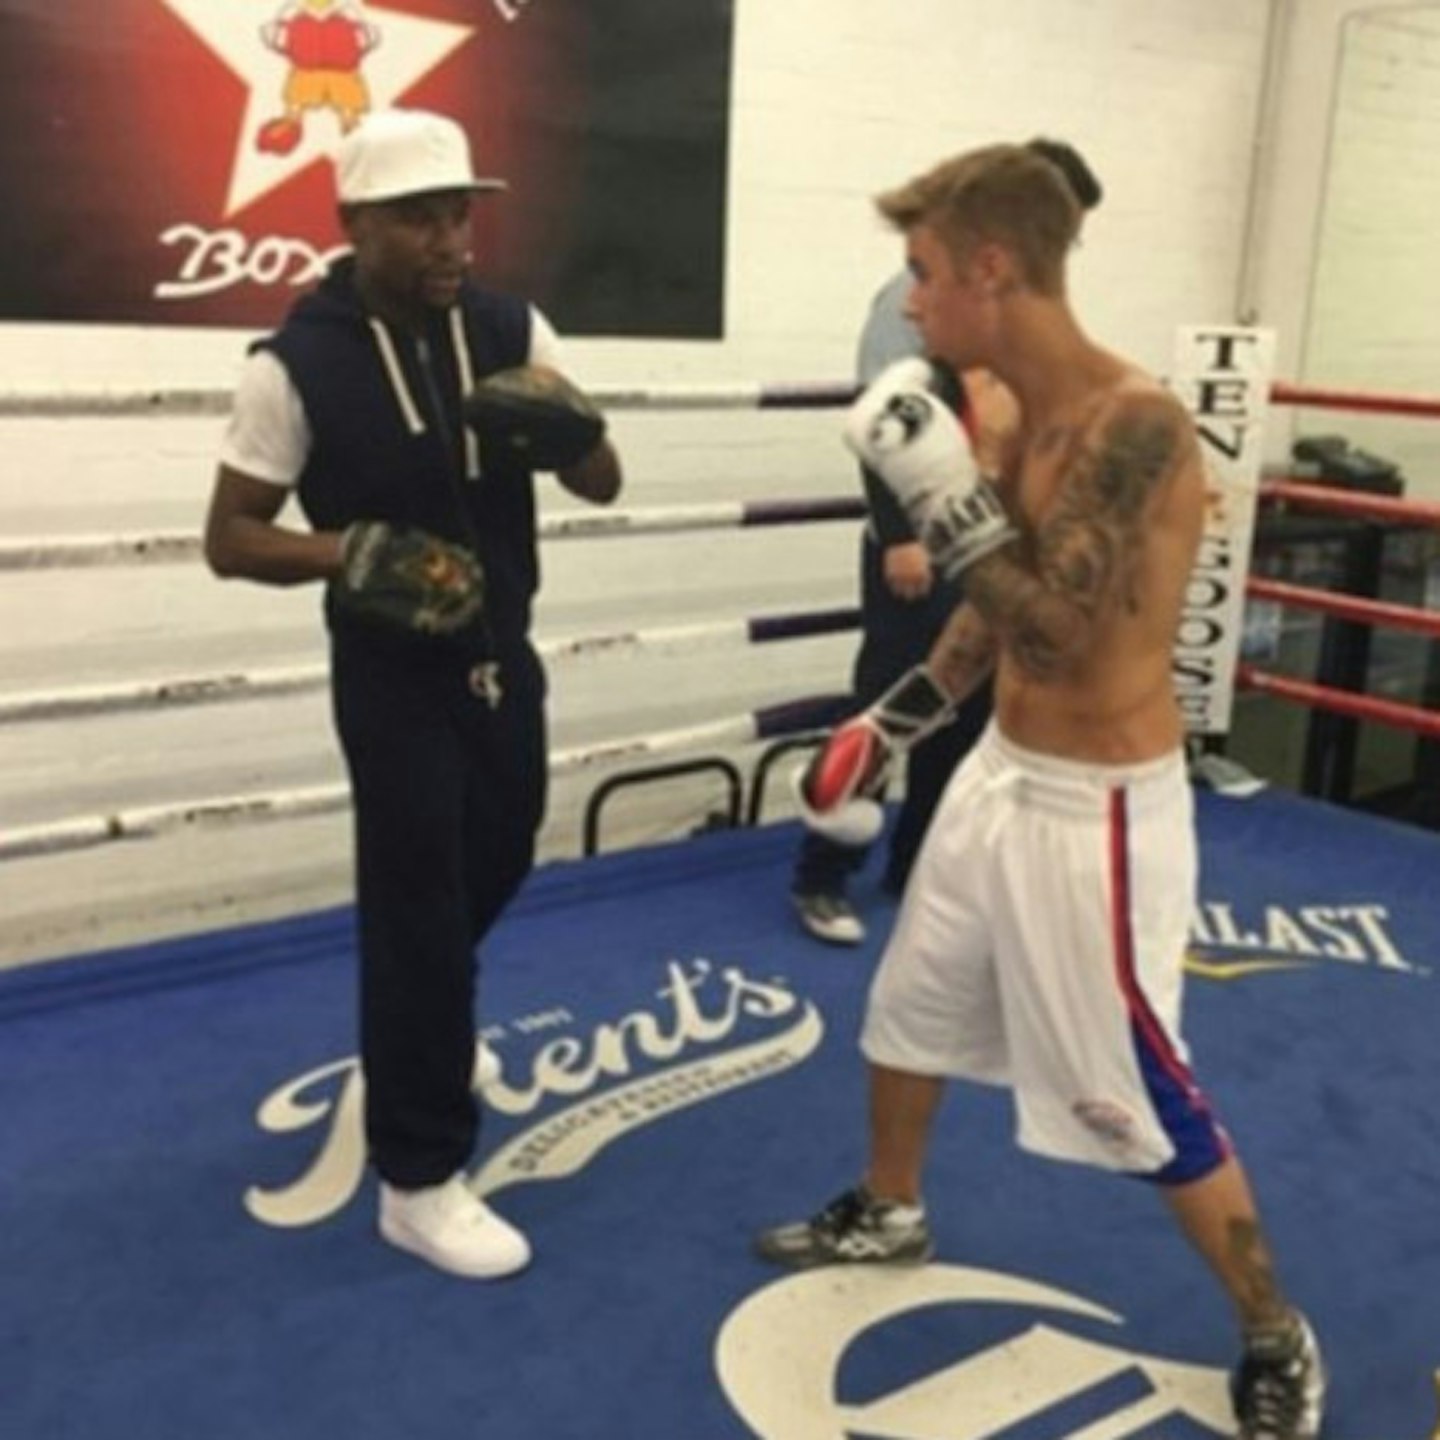 Floyd giving Justin a chance in the ring